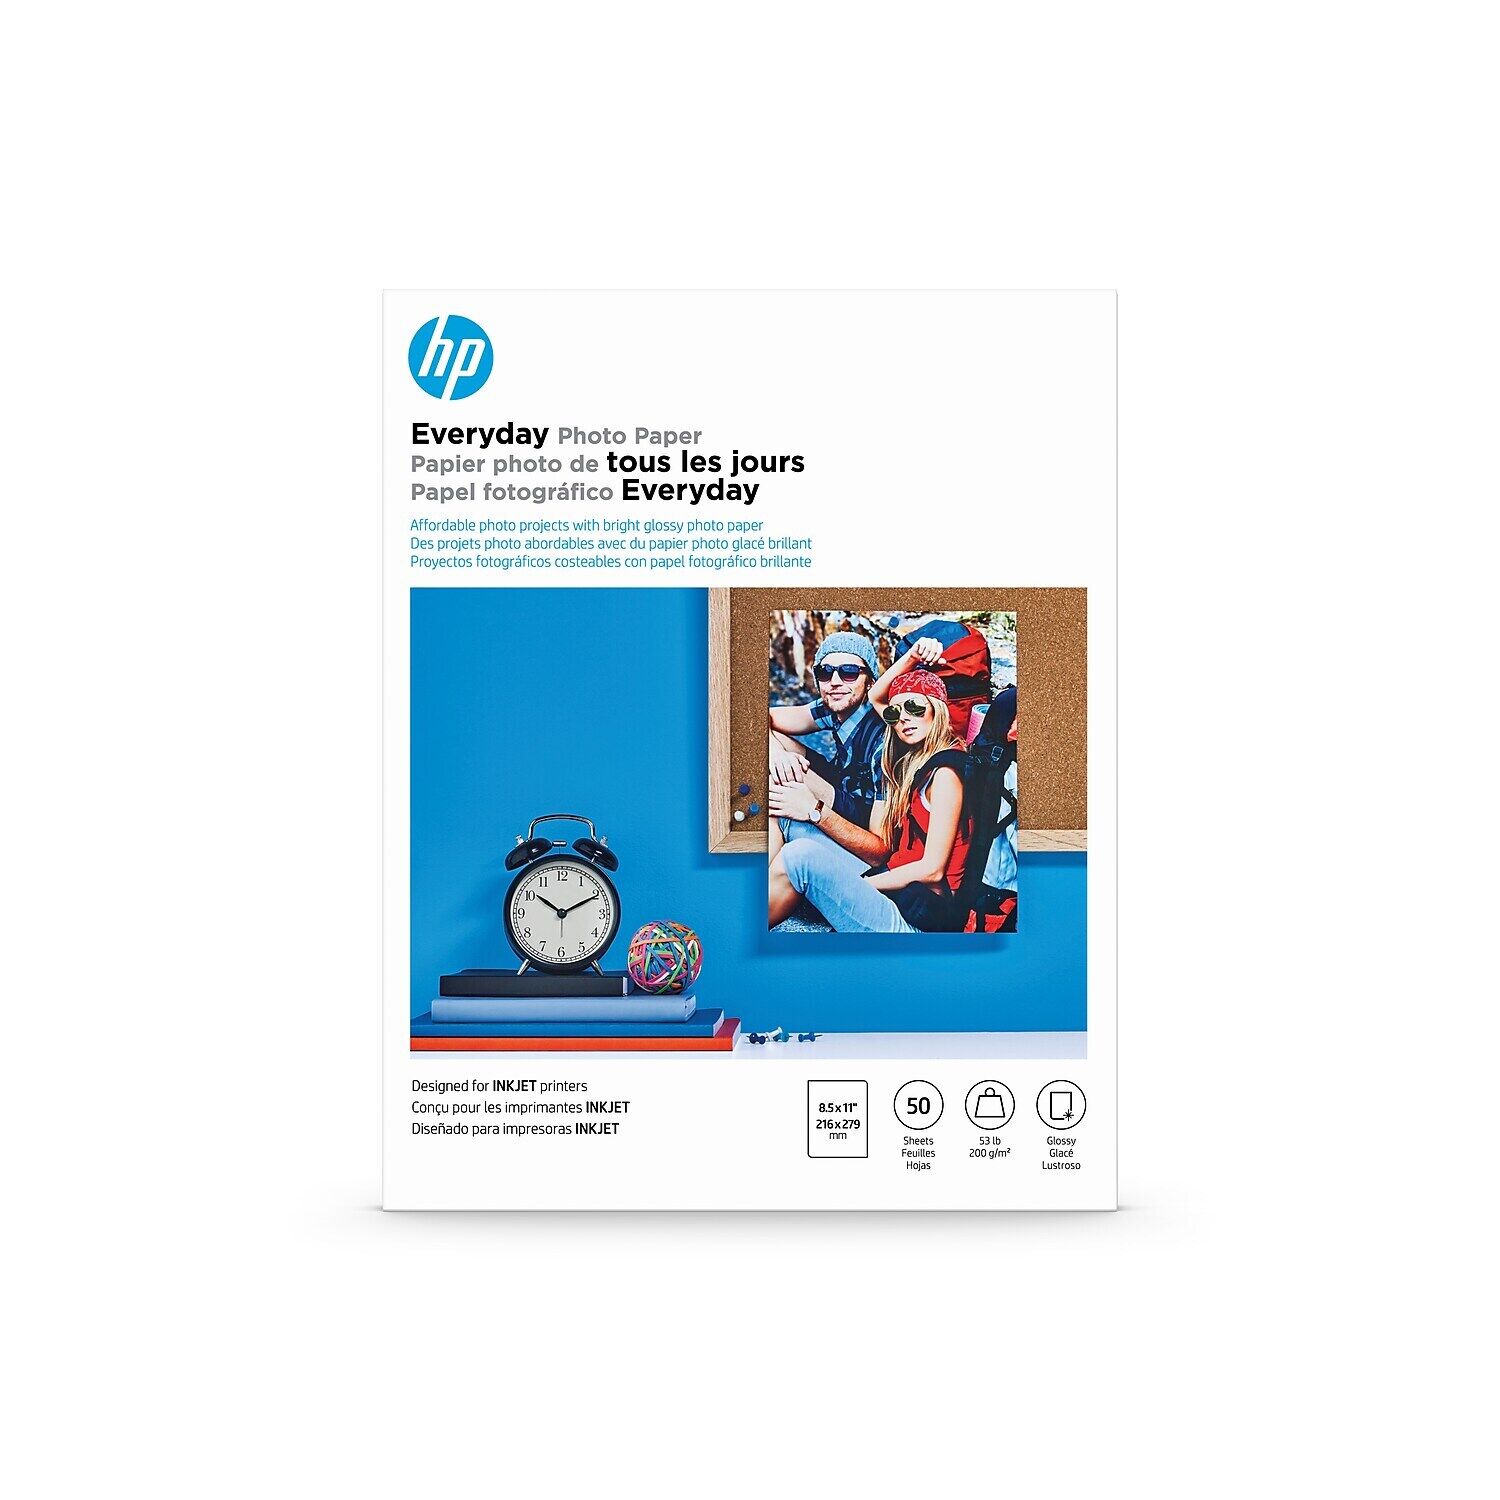 HP Everyday Photo Paper Glossy 8-1/2 x 11 50 Sheets/Pack Q8723A